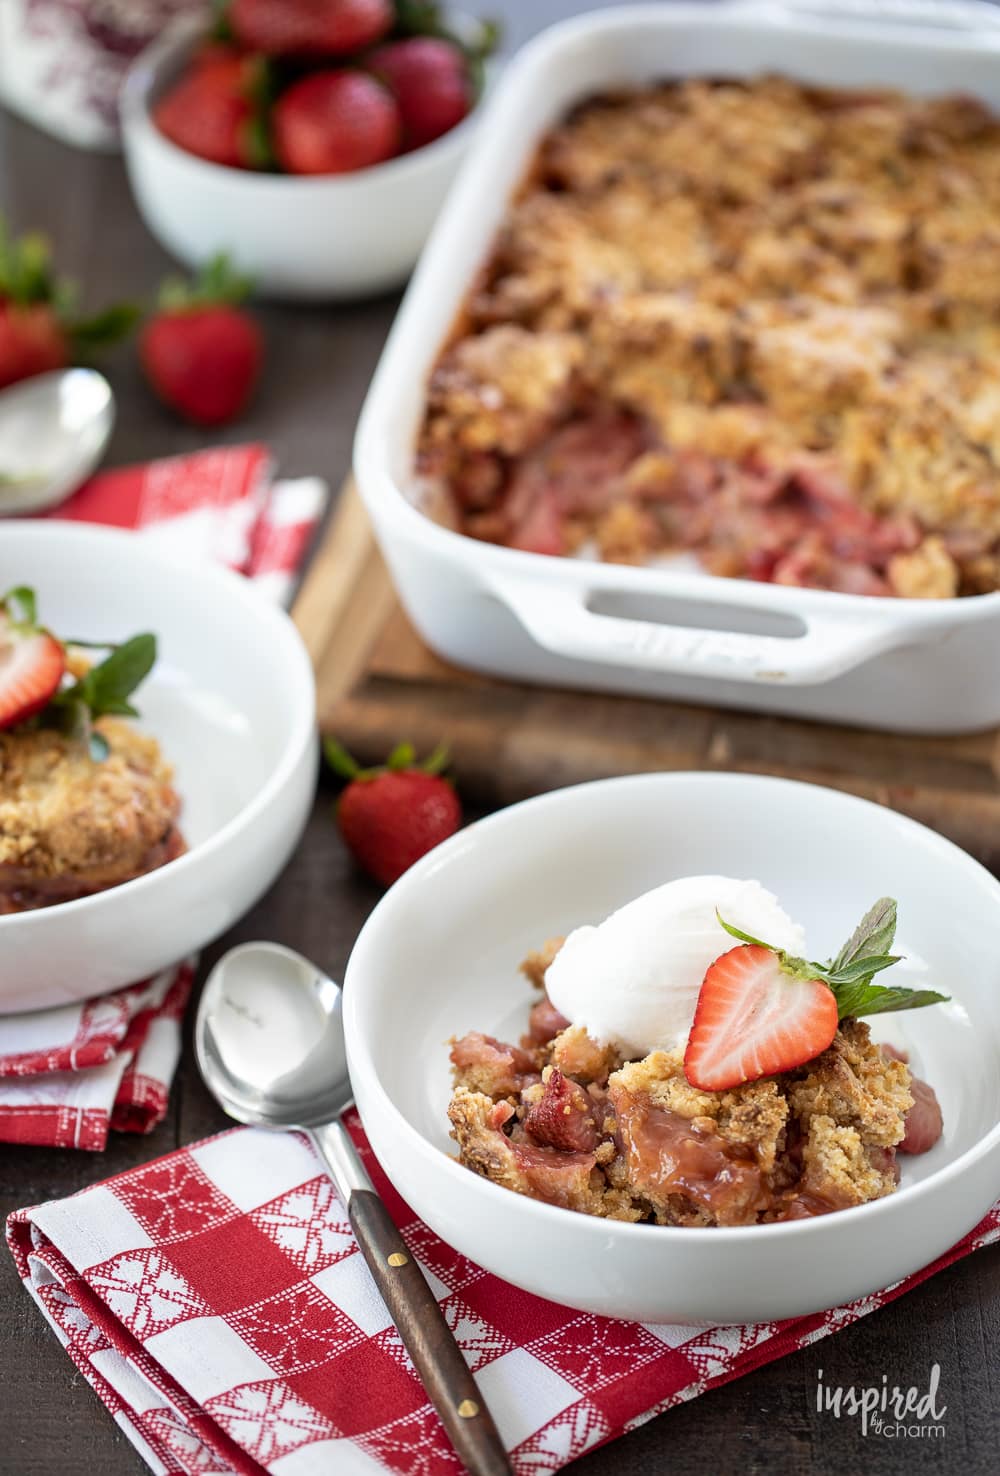 strawberry crumble in a baking dish and served in two bowls with ice cream.